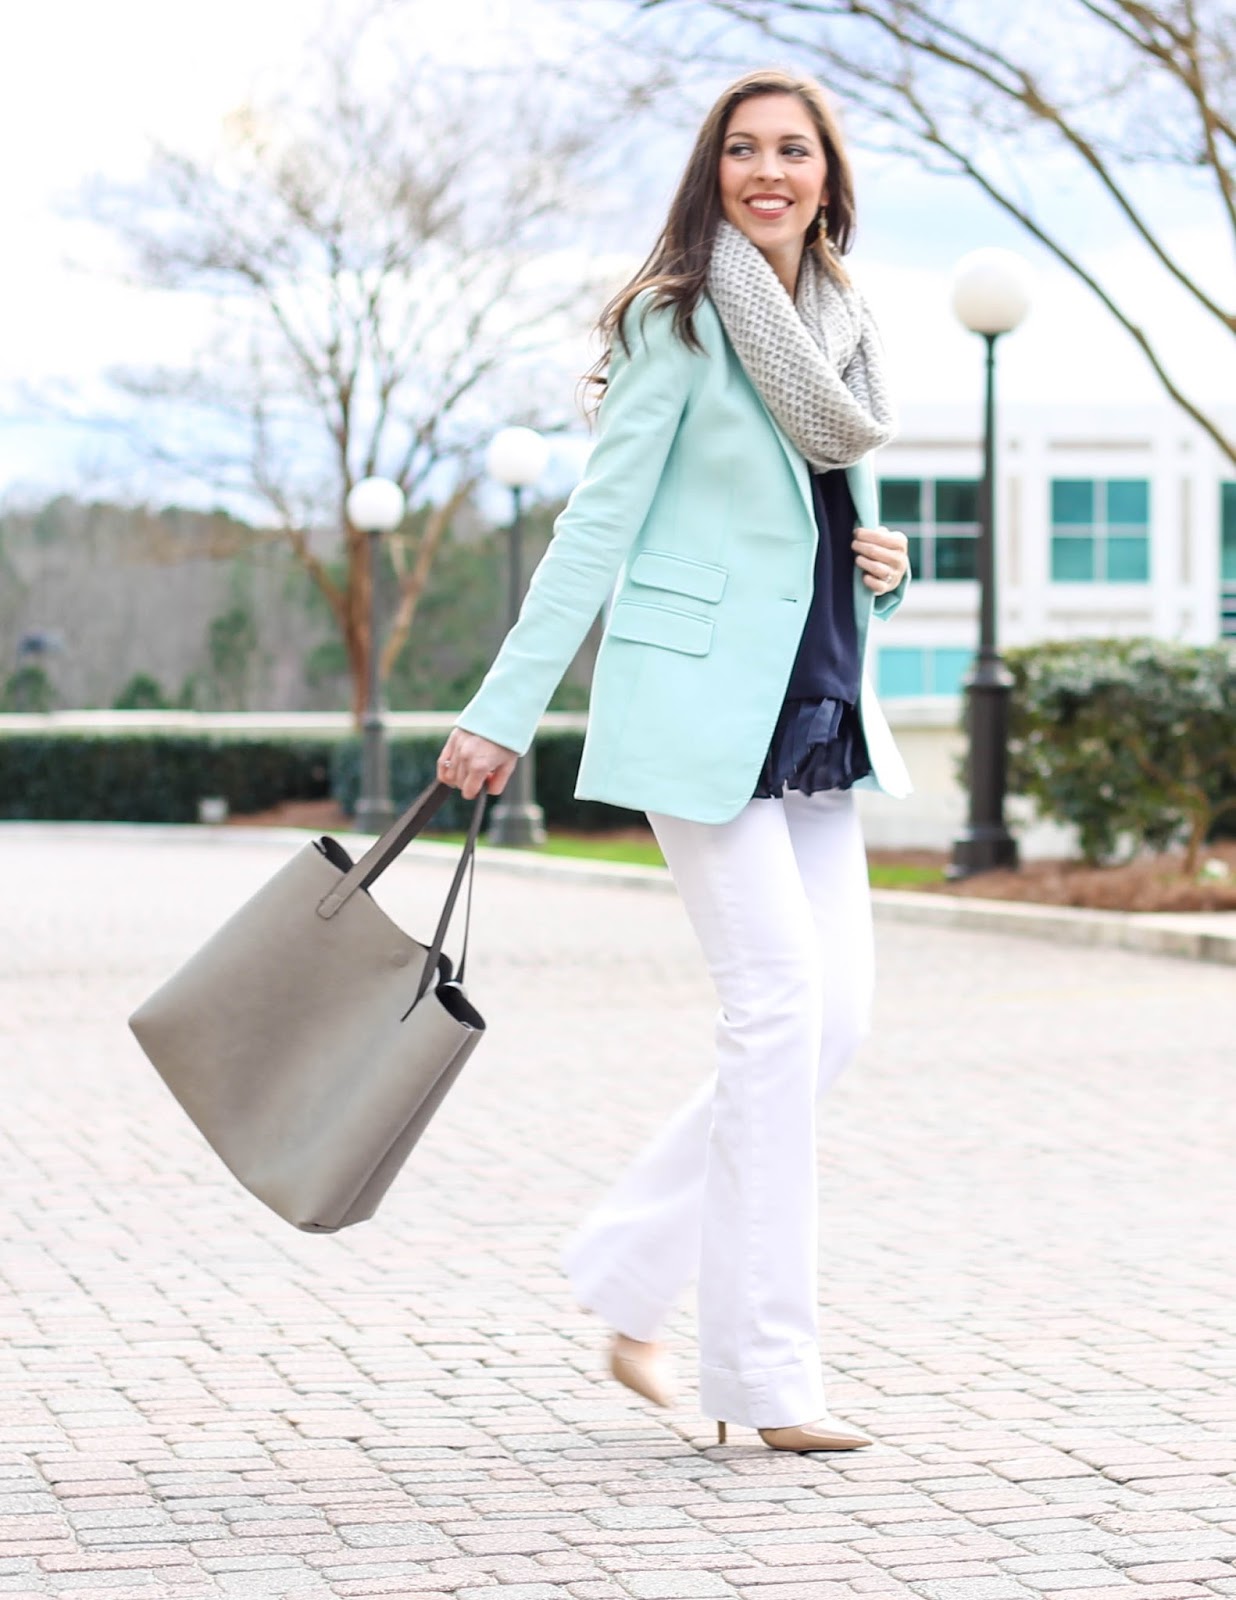 Raven and Riley earrings, Mint Blazer, Banana Republic turquoise blazer, grey knit infinity scarf, white denim wide leg trouser pants, cute winter outfit, winter outfit ideas, work outfit, cute work appropriate outfit, business casual outfit ideas, fashion blogger, north carolina blogger, pretty in the pines blog, LOFT wide leg white pants, 2016 trends, pastel blazer